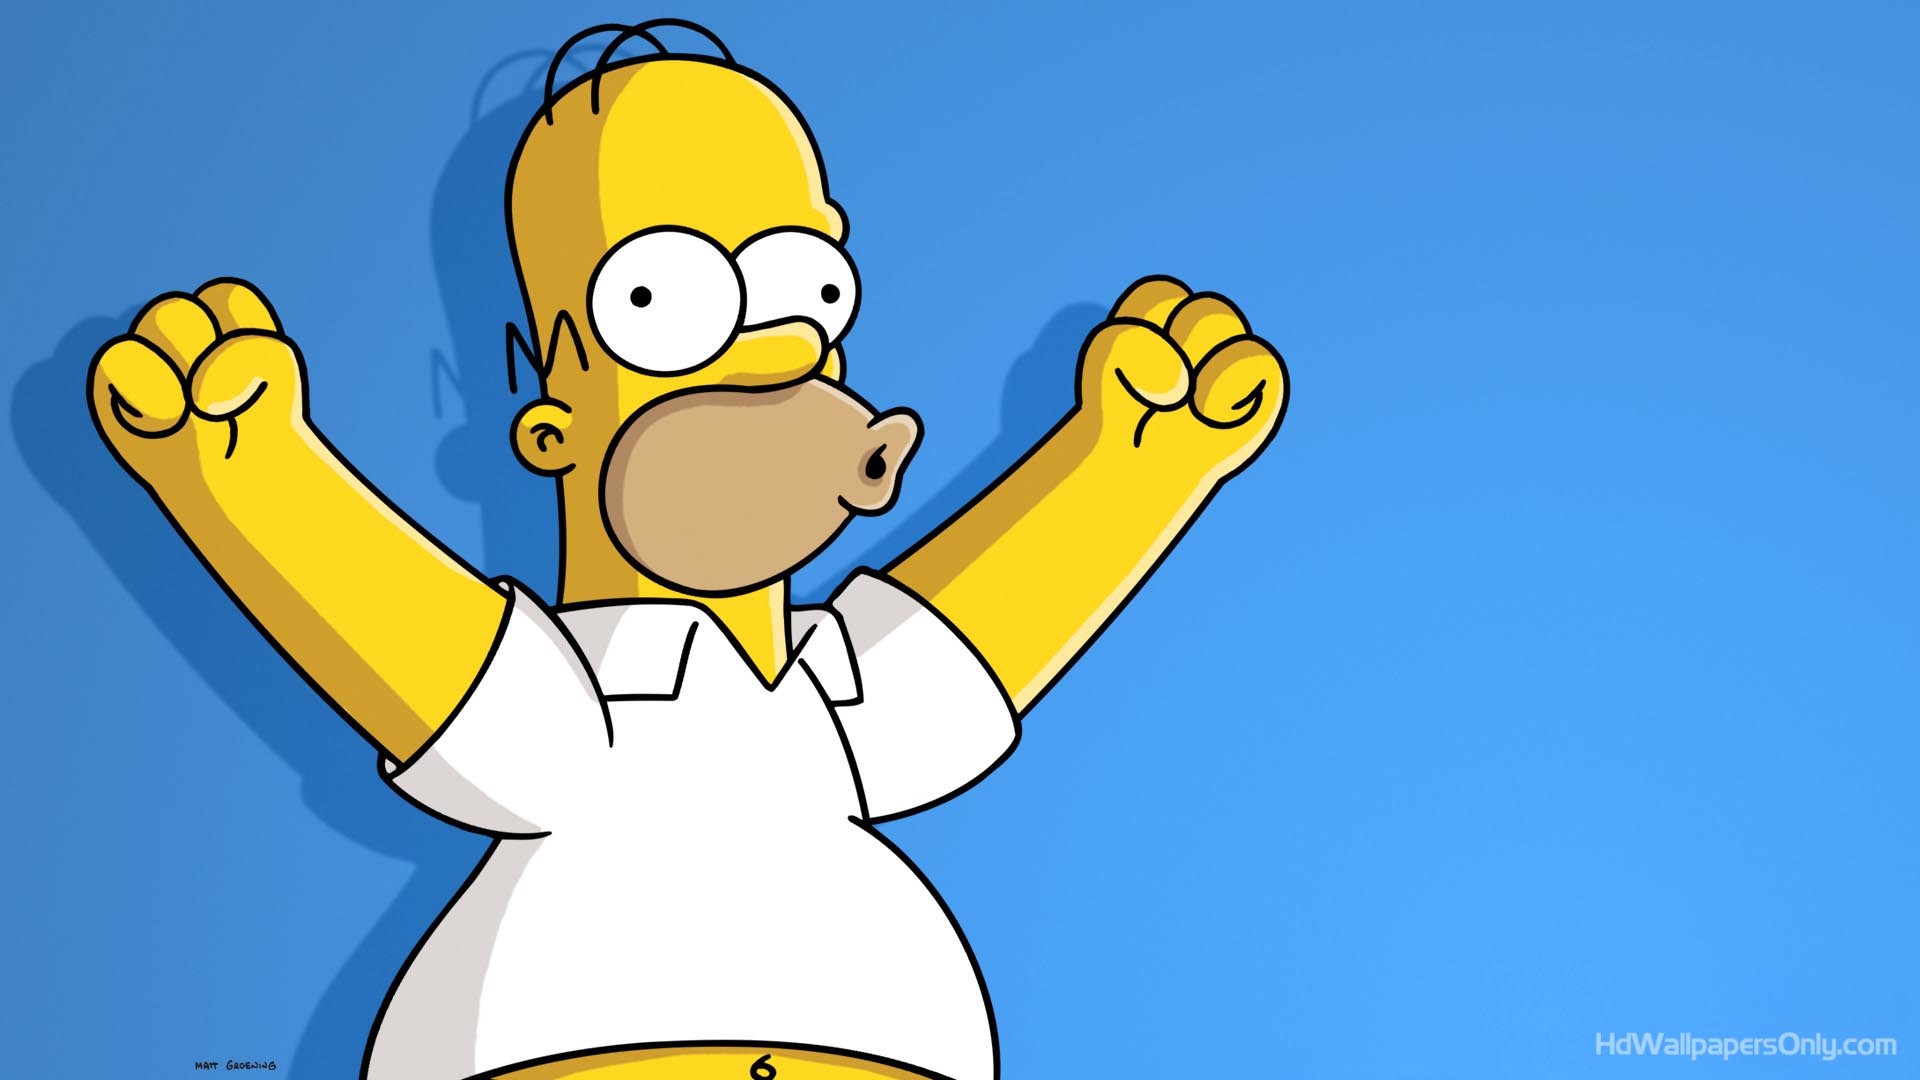 1920x1080 The Simpsons Wallpaper (45 Wallpapers)